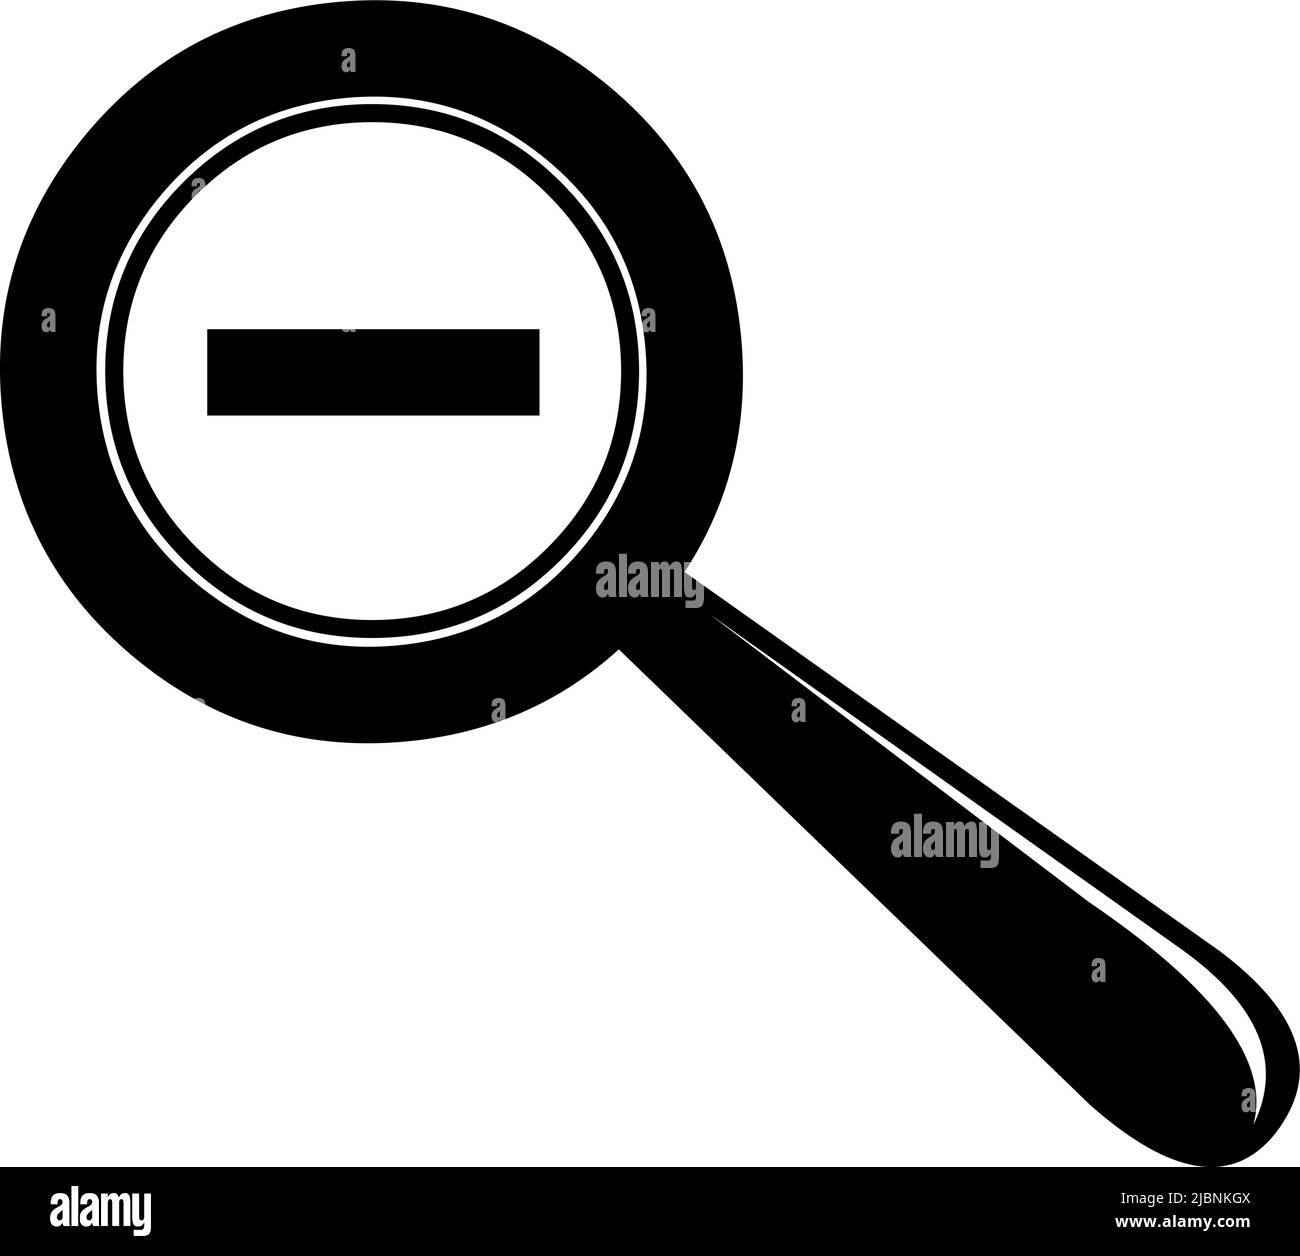 Vector icon illustration of a magnifying glass with the minus sign, in concept of decrease or zoom out Stock Vector